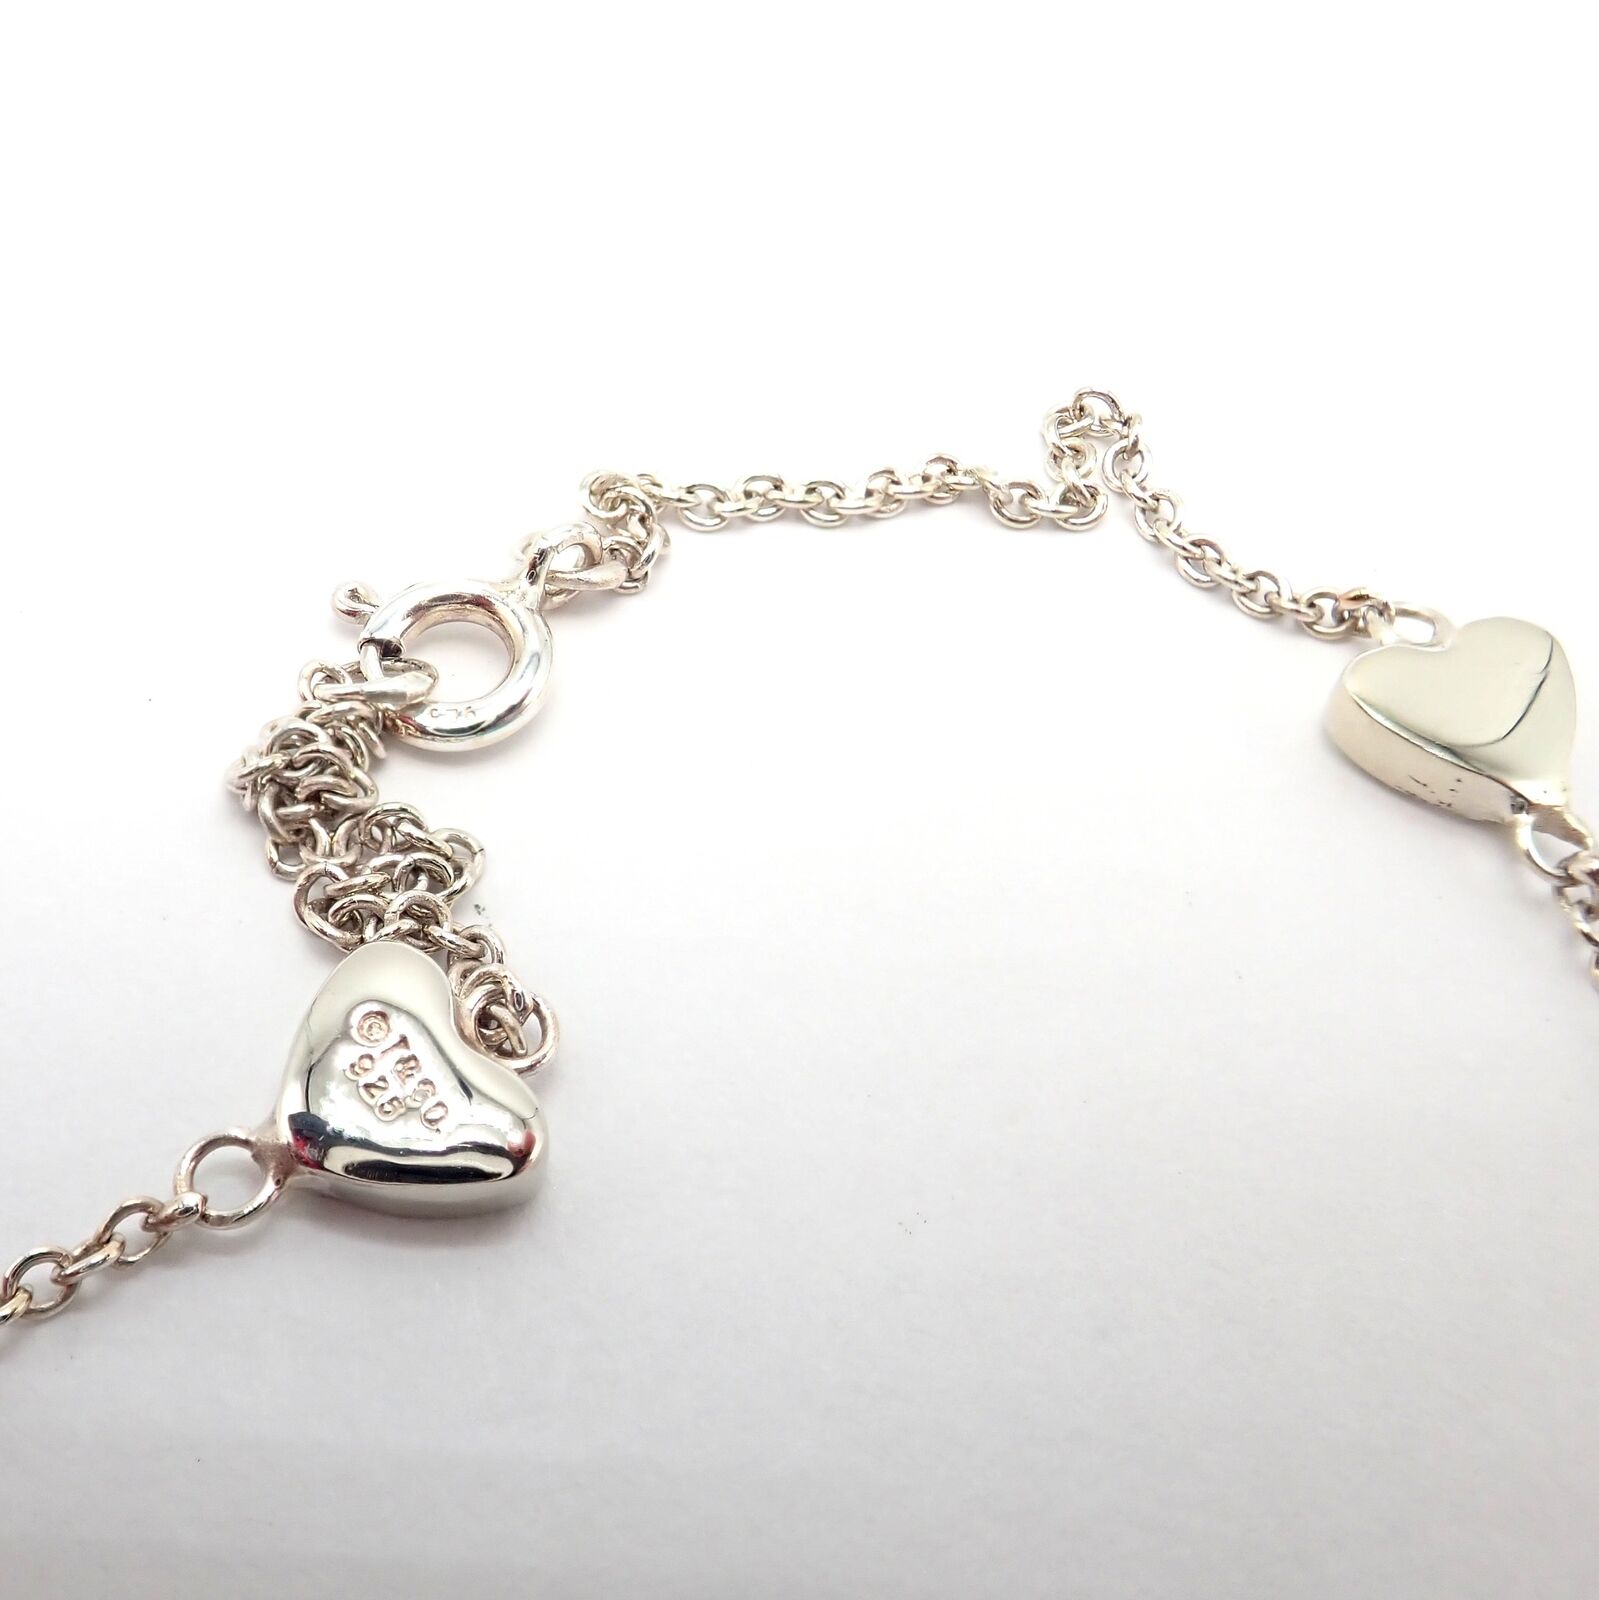 Tiffany & Co. Jewelry & Watches:Fine Jewelry:Necklaces & Pendants Rare! Tiffany & Co Sterling Silver Heart Link Drop Necklace